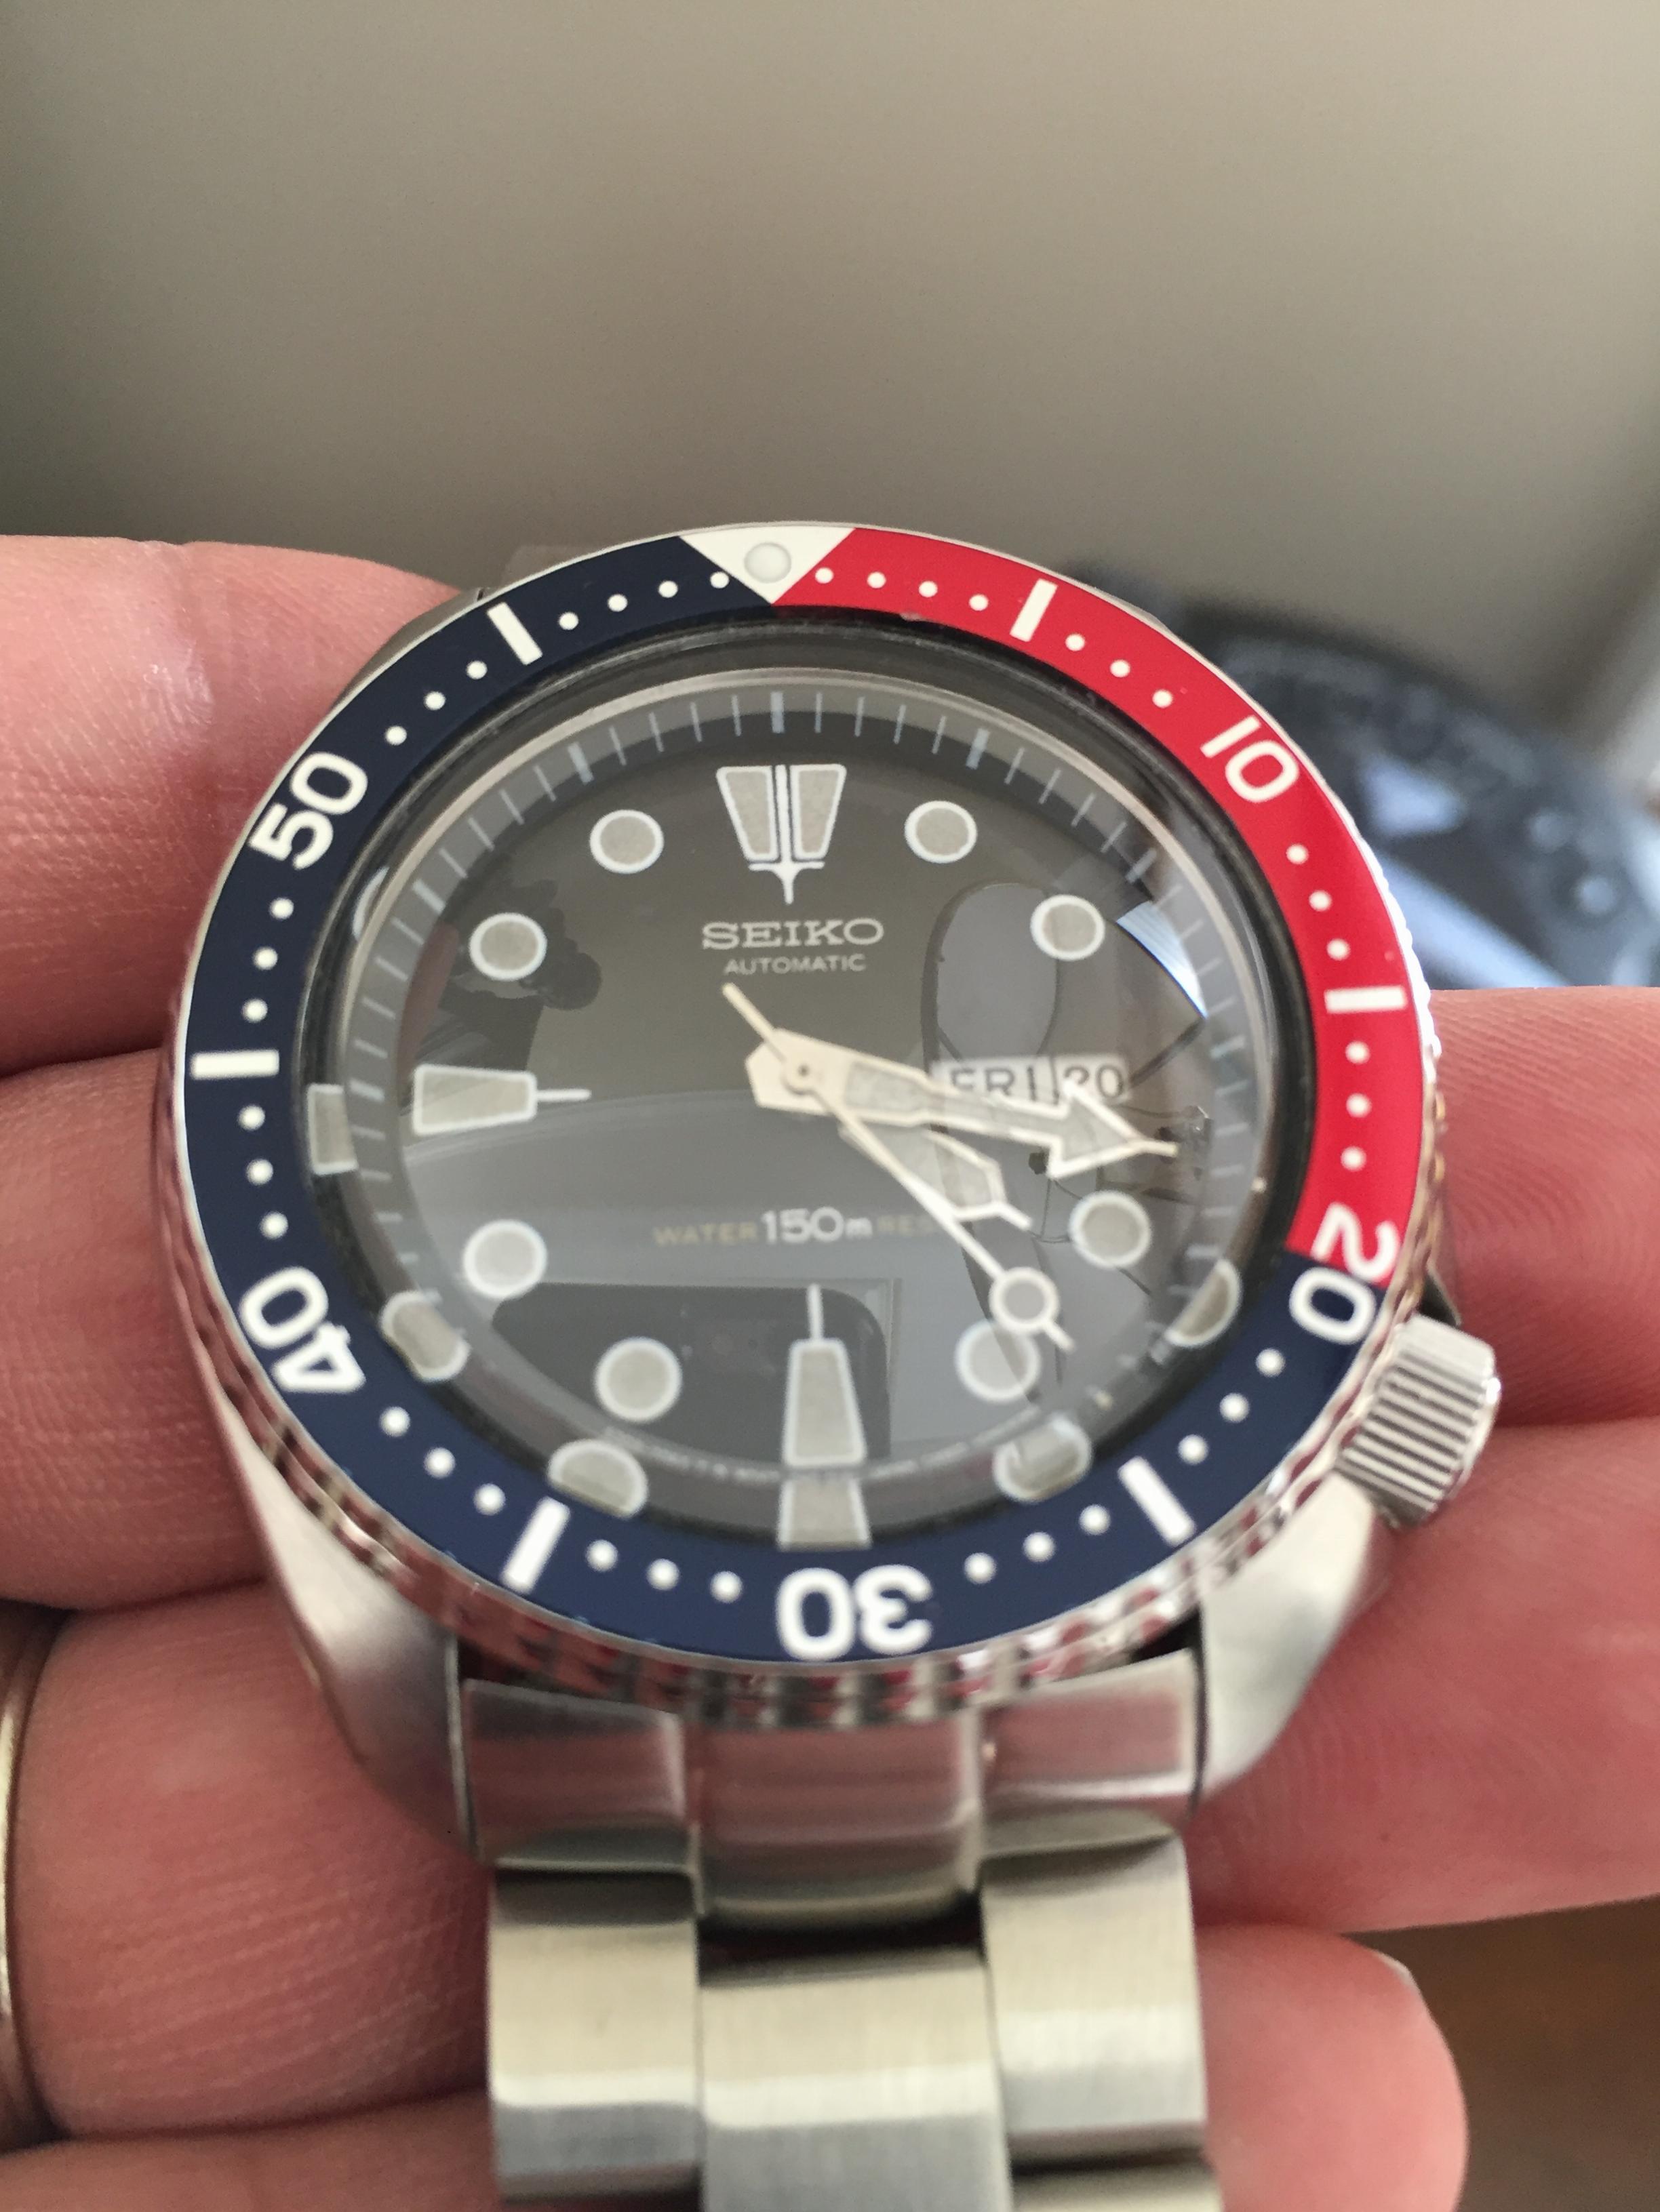 Just refurbished Seiko 6139-7049 - Your Watch Collection - Watch Repair Talk